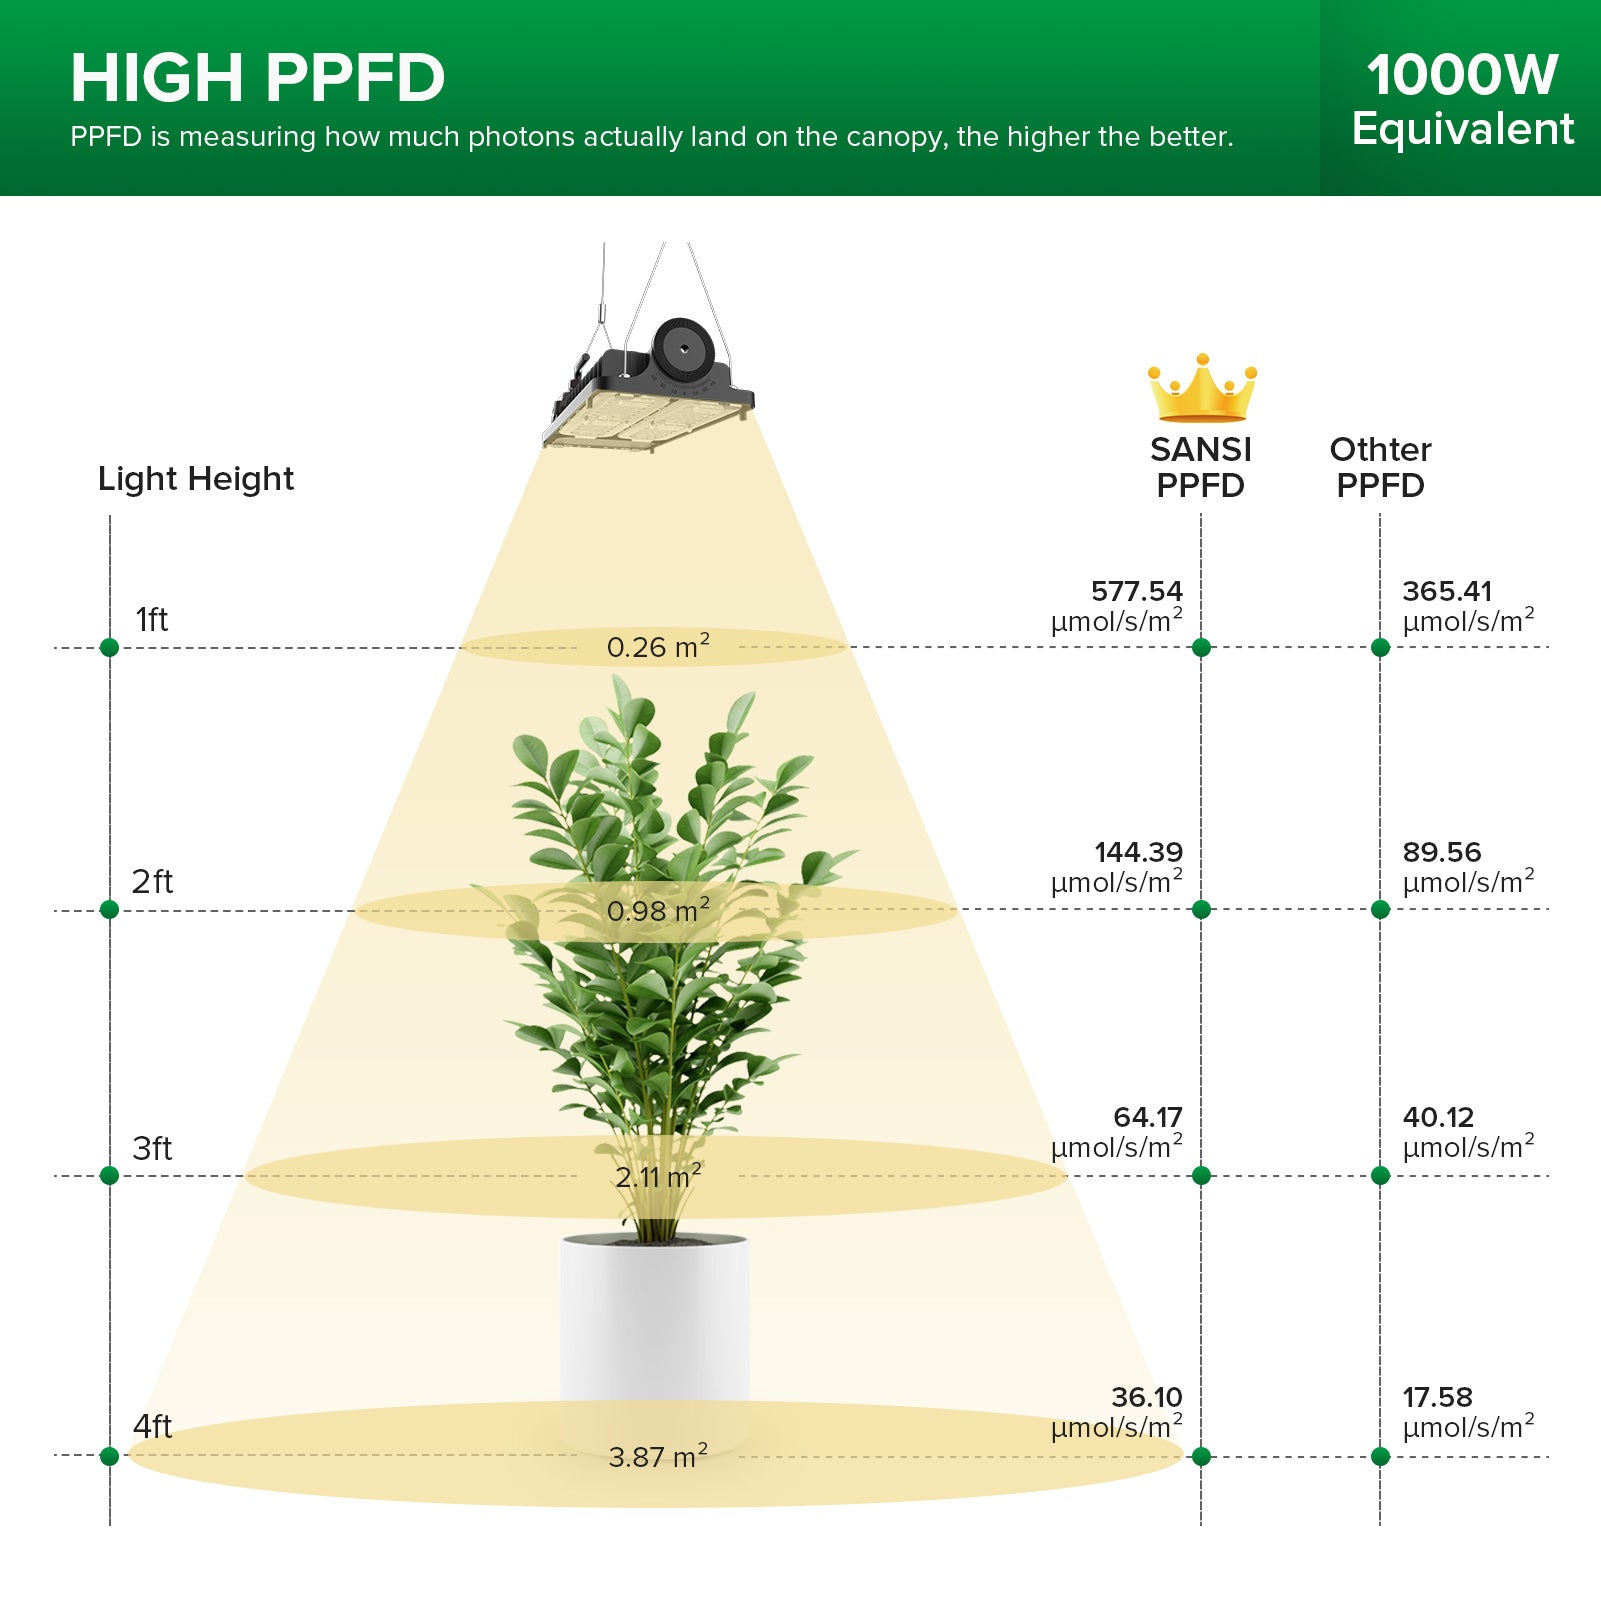 Dimmable 100W LED Grow Light for large plants indoor with high PPFD, 1000W equivalent